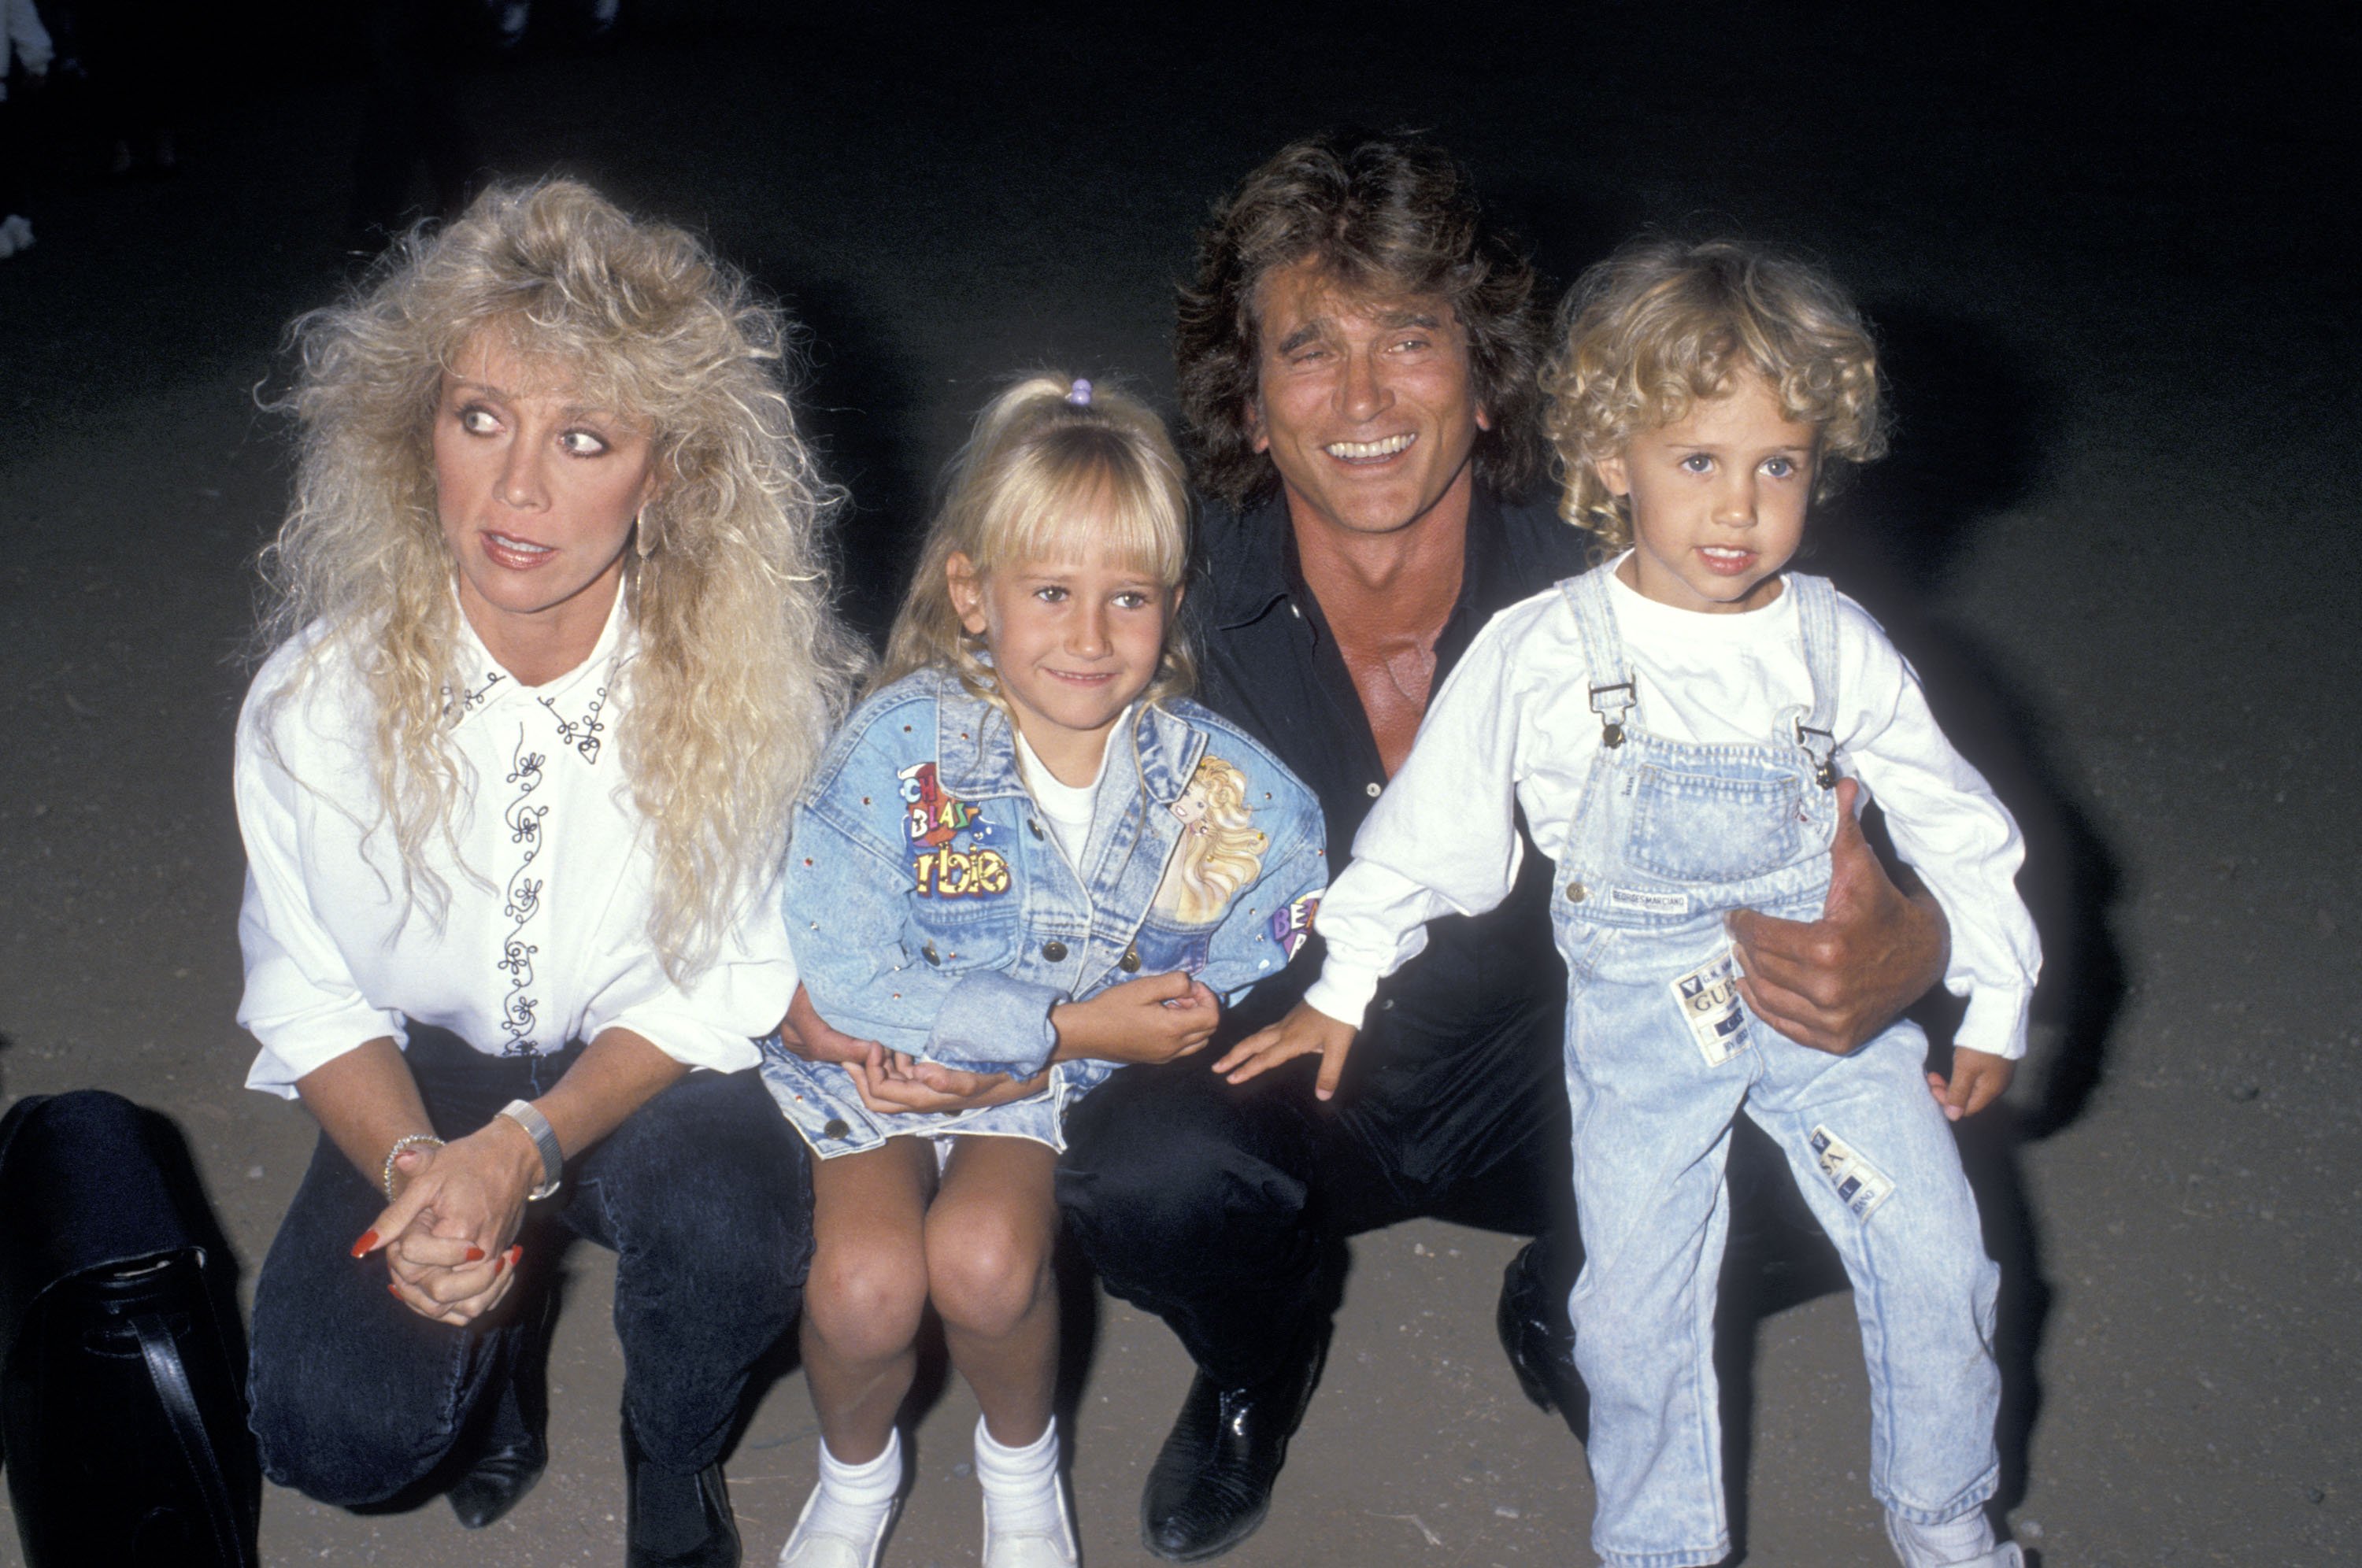 Cindy Landon in a white shirt and black jeans, Jennifer Landon in a denim jacket and white tennis shoes, Michael Landon in a black shirt and black pants, Sean Landon in a denim overall outfit and a white shirt.